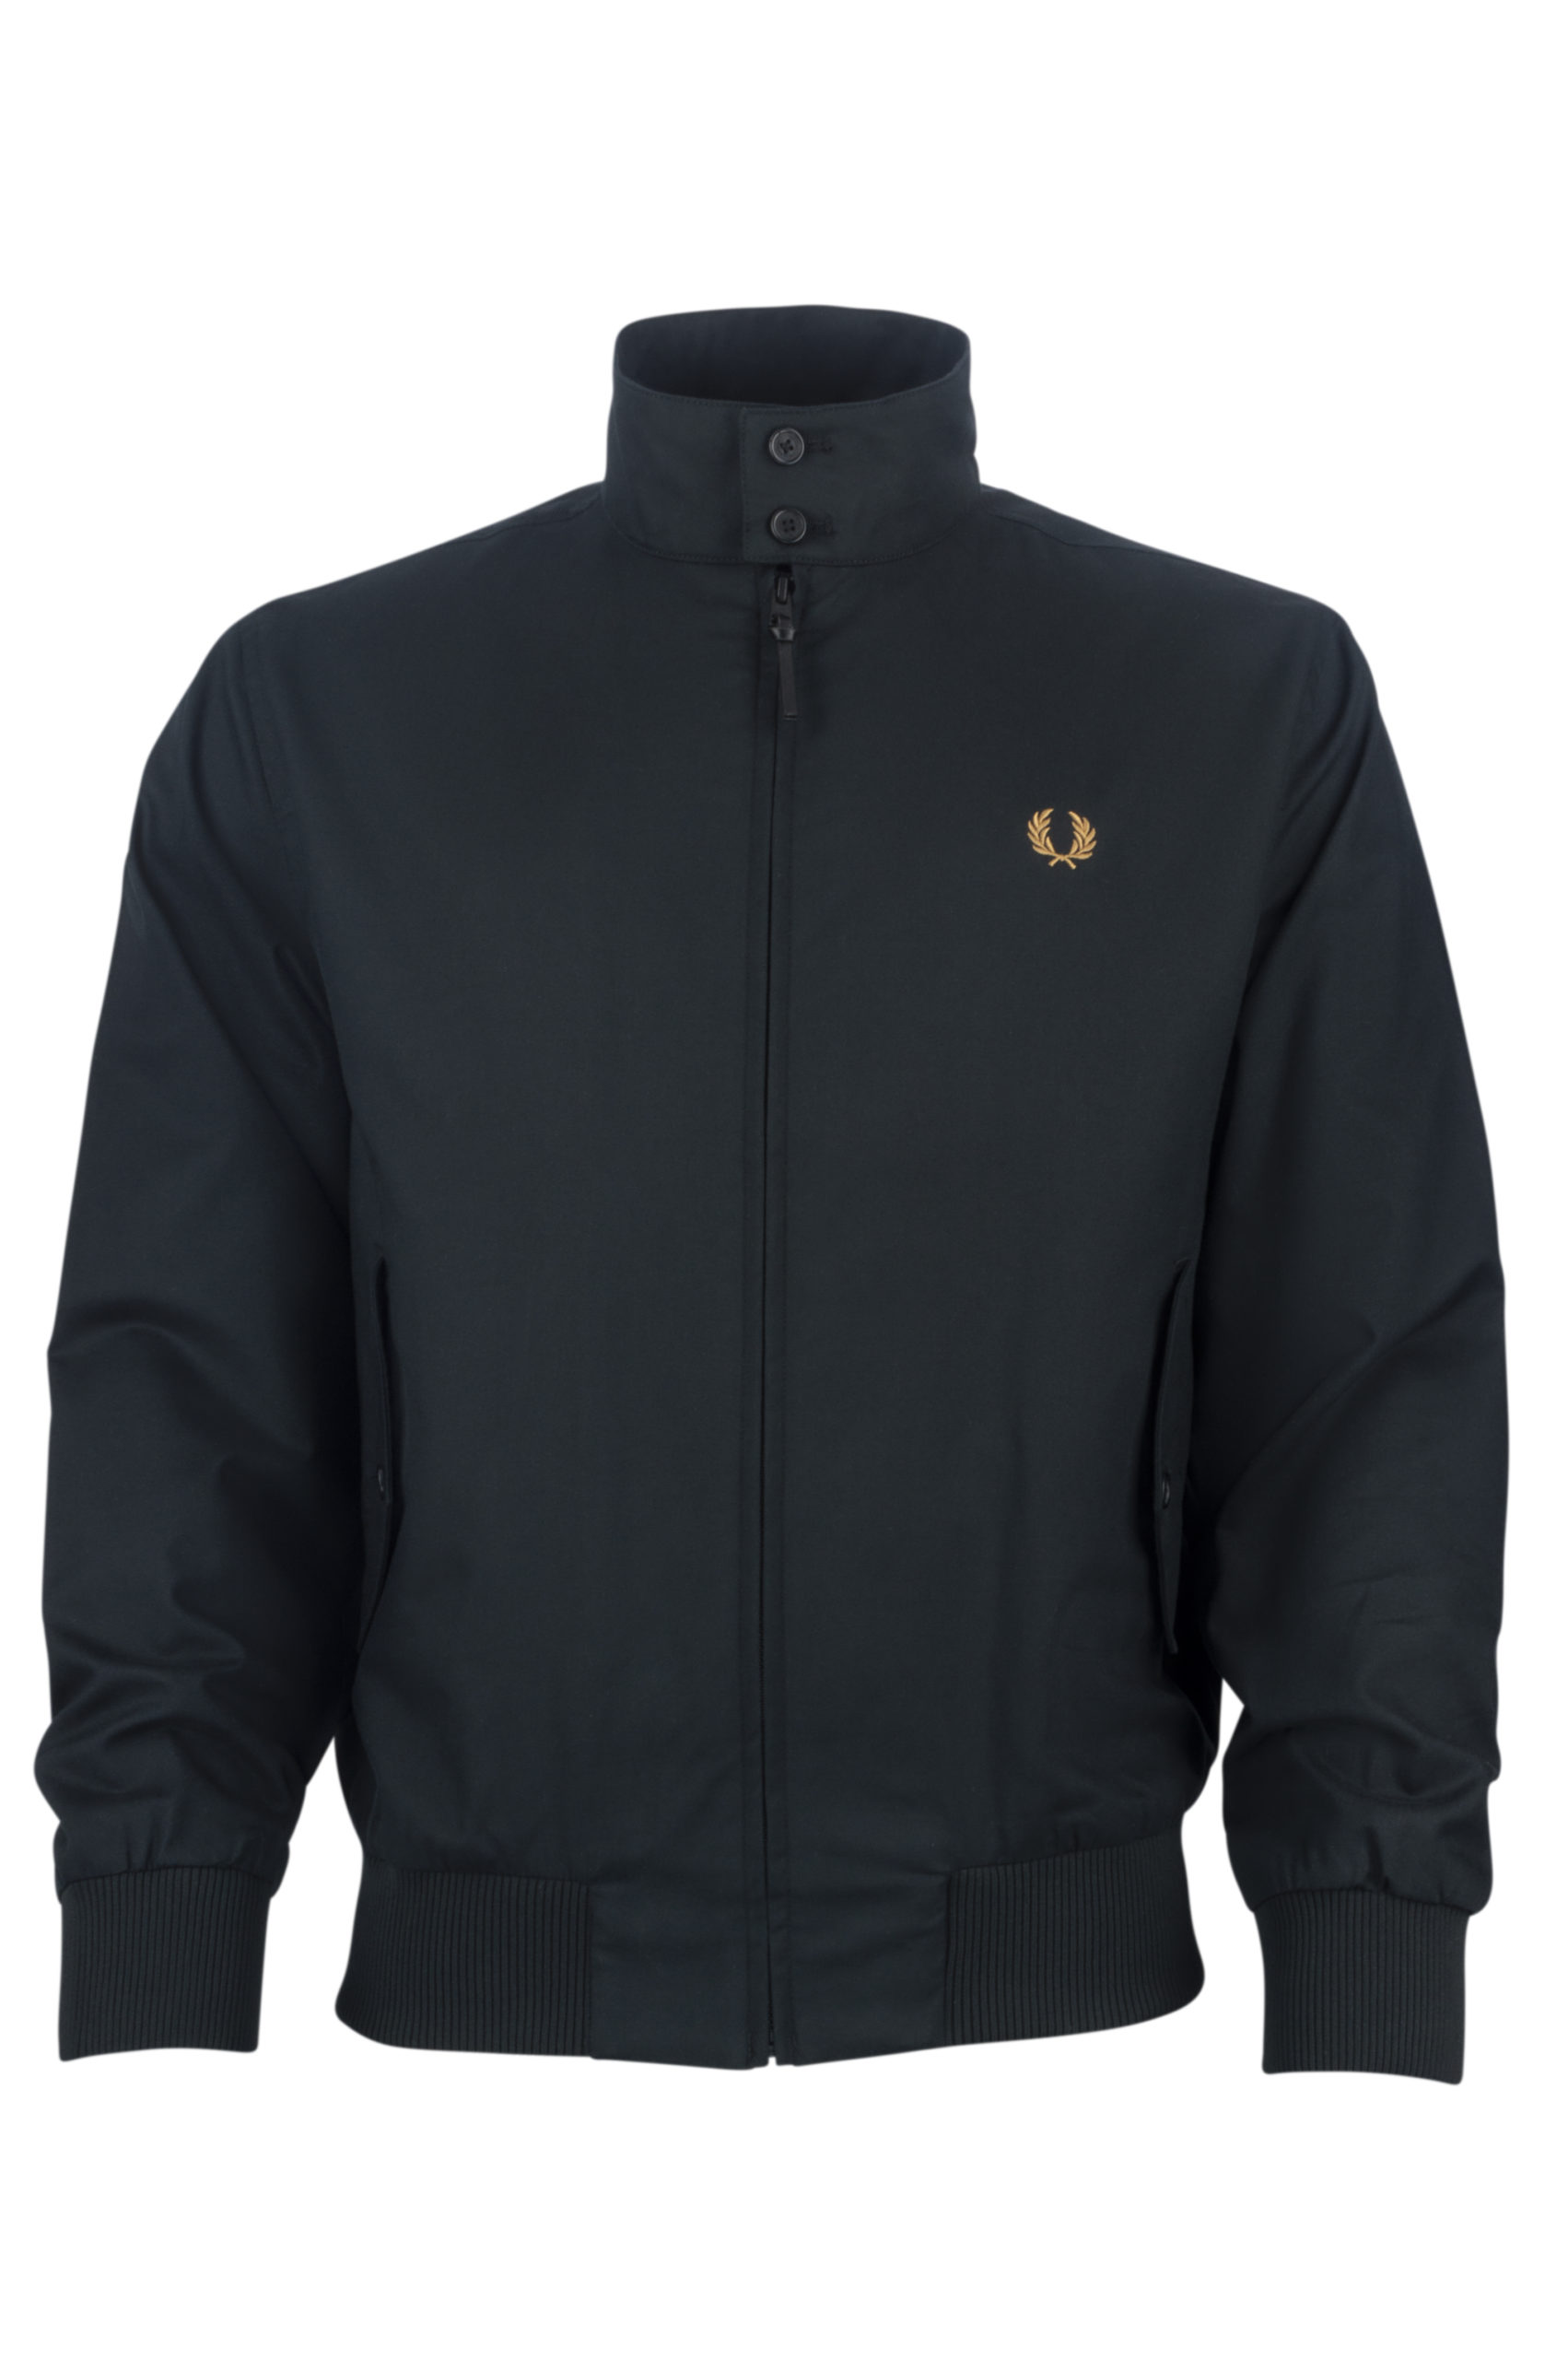 FRED PERRY - AW23 HARRINGTON JACKET - J4556 | Baccus